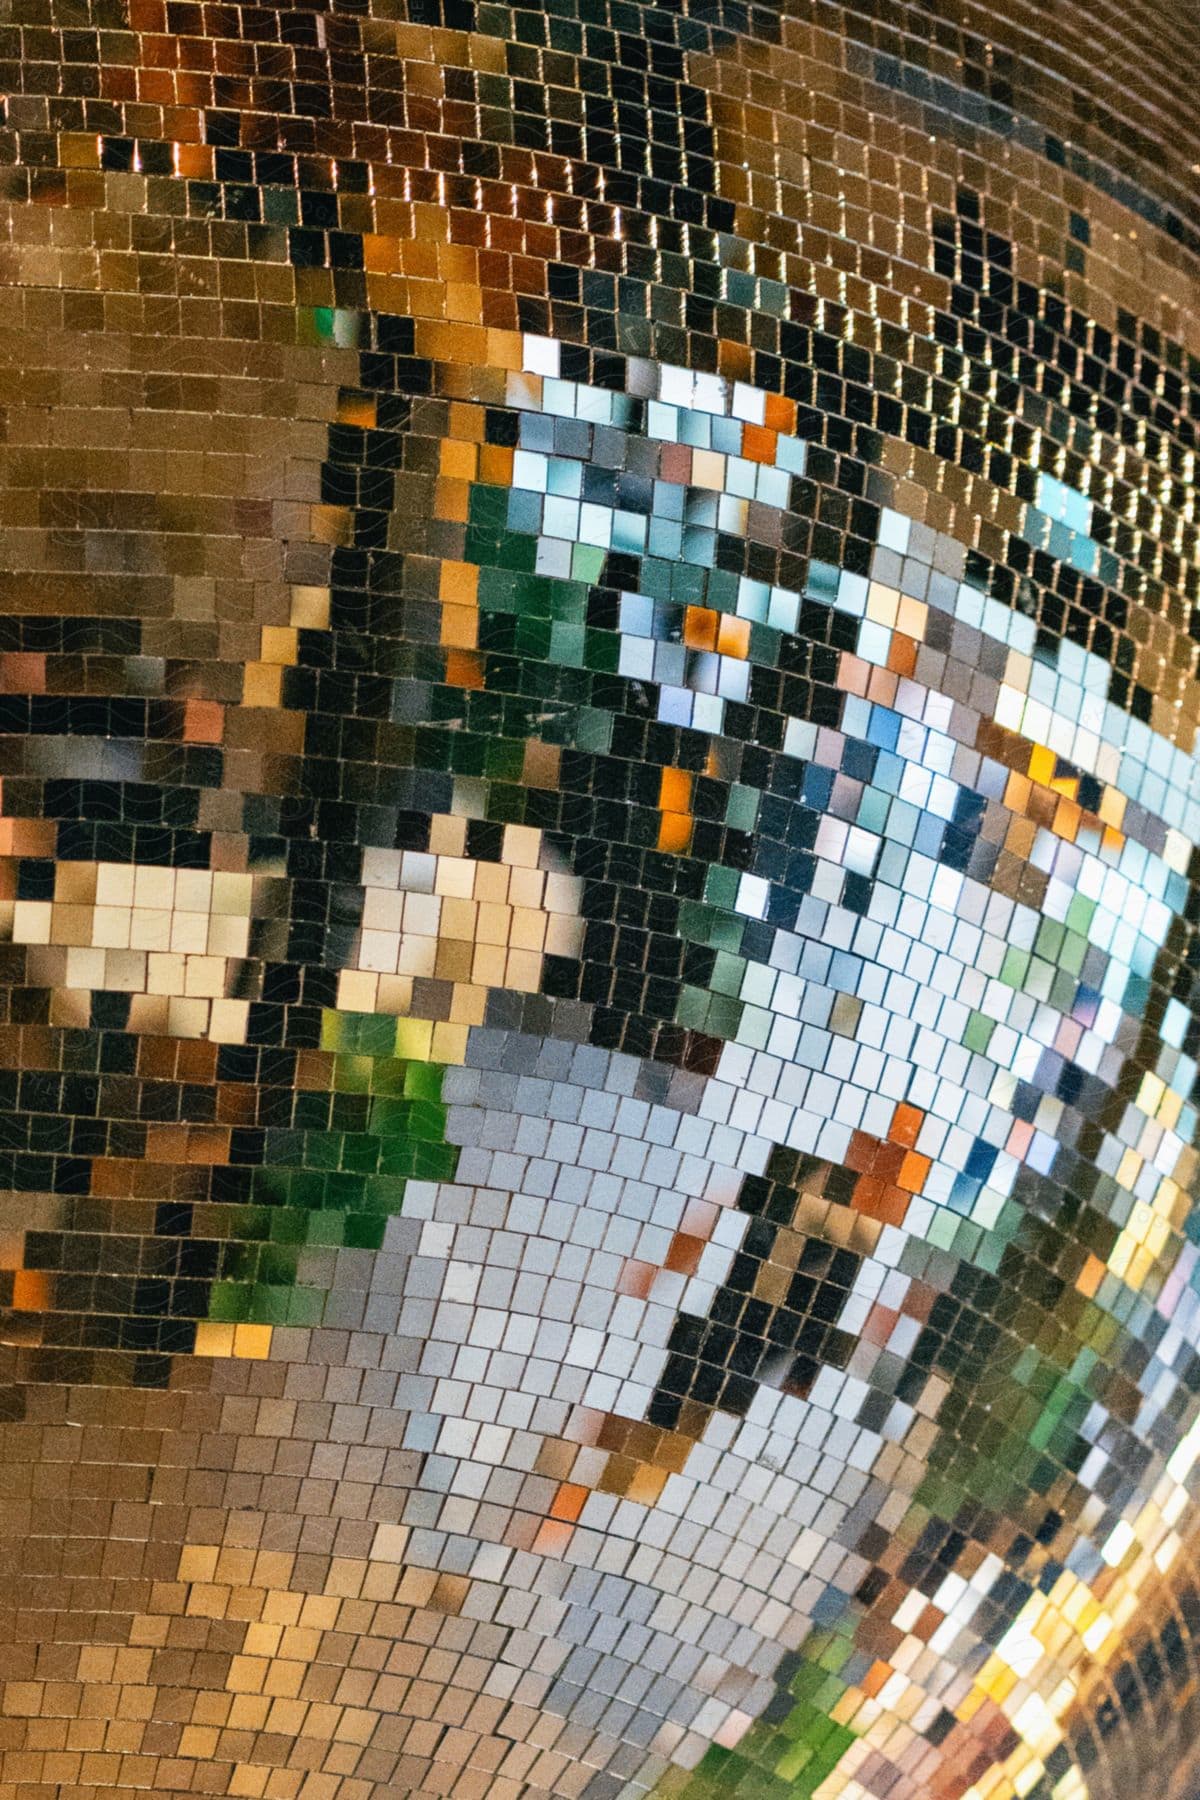 A close-up of a disco ball's glass squares reflecting the room around it.